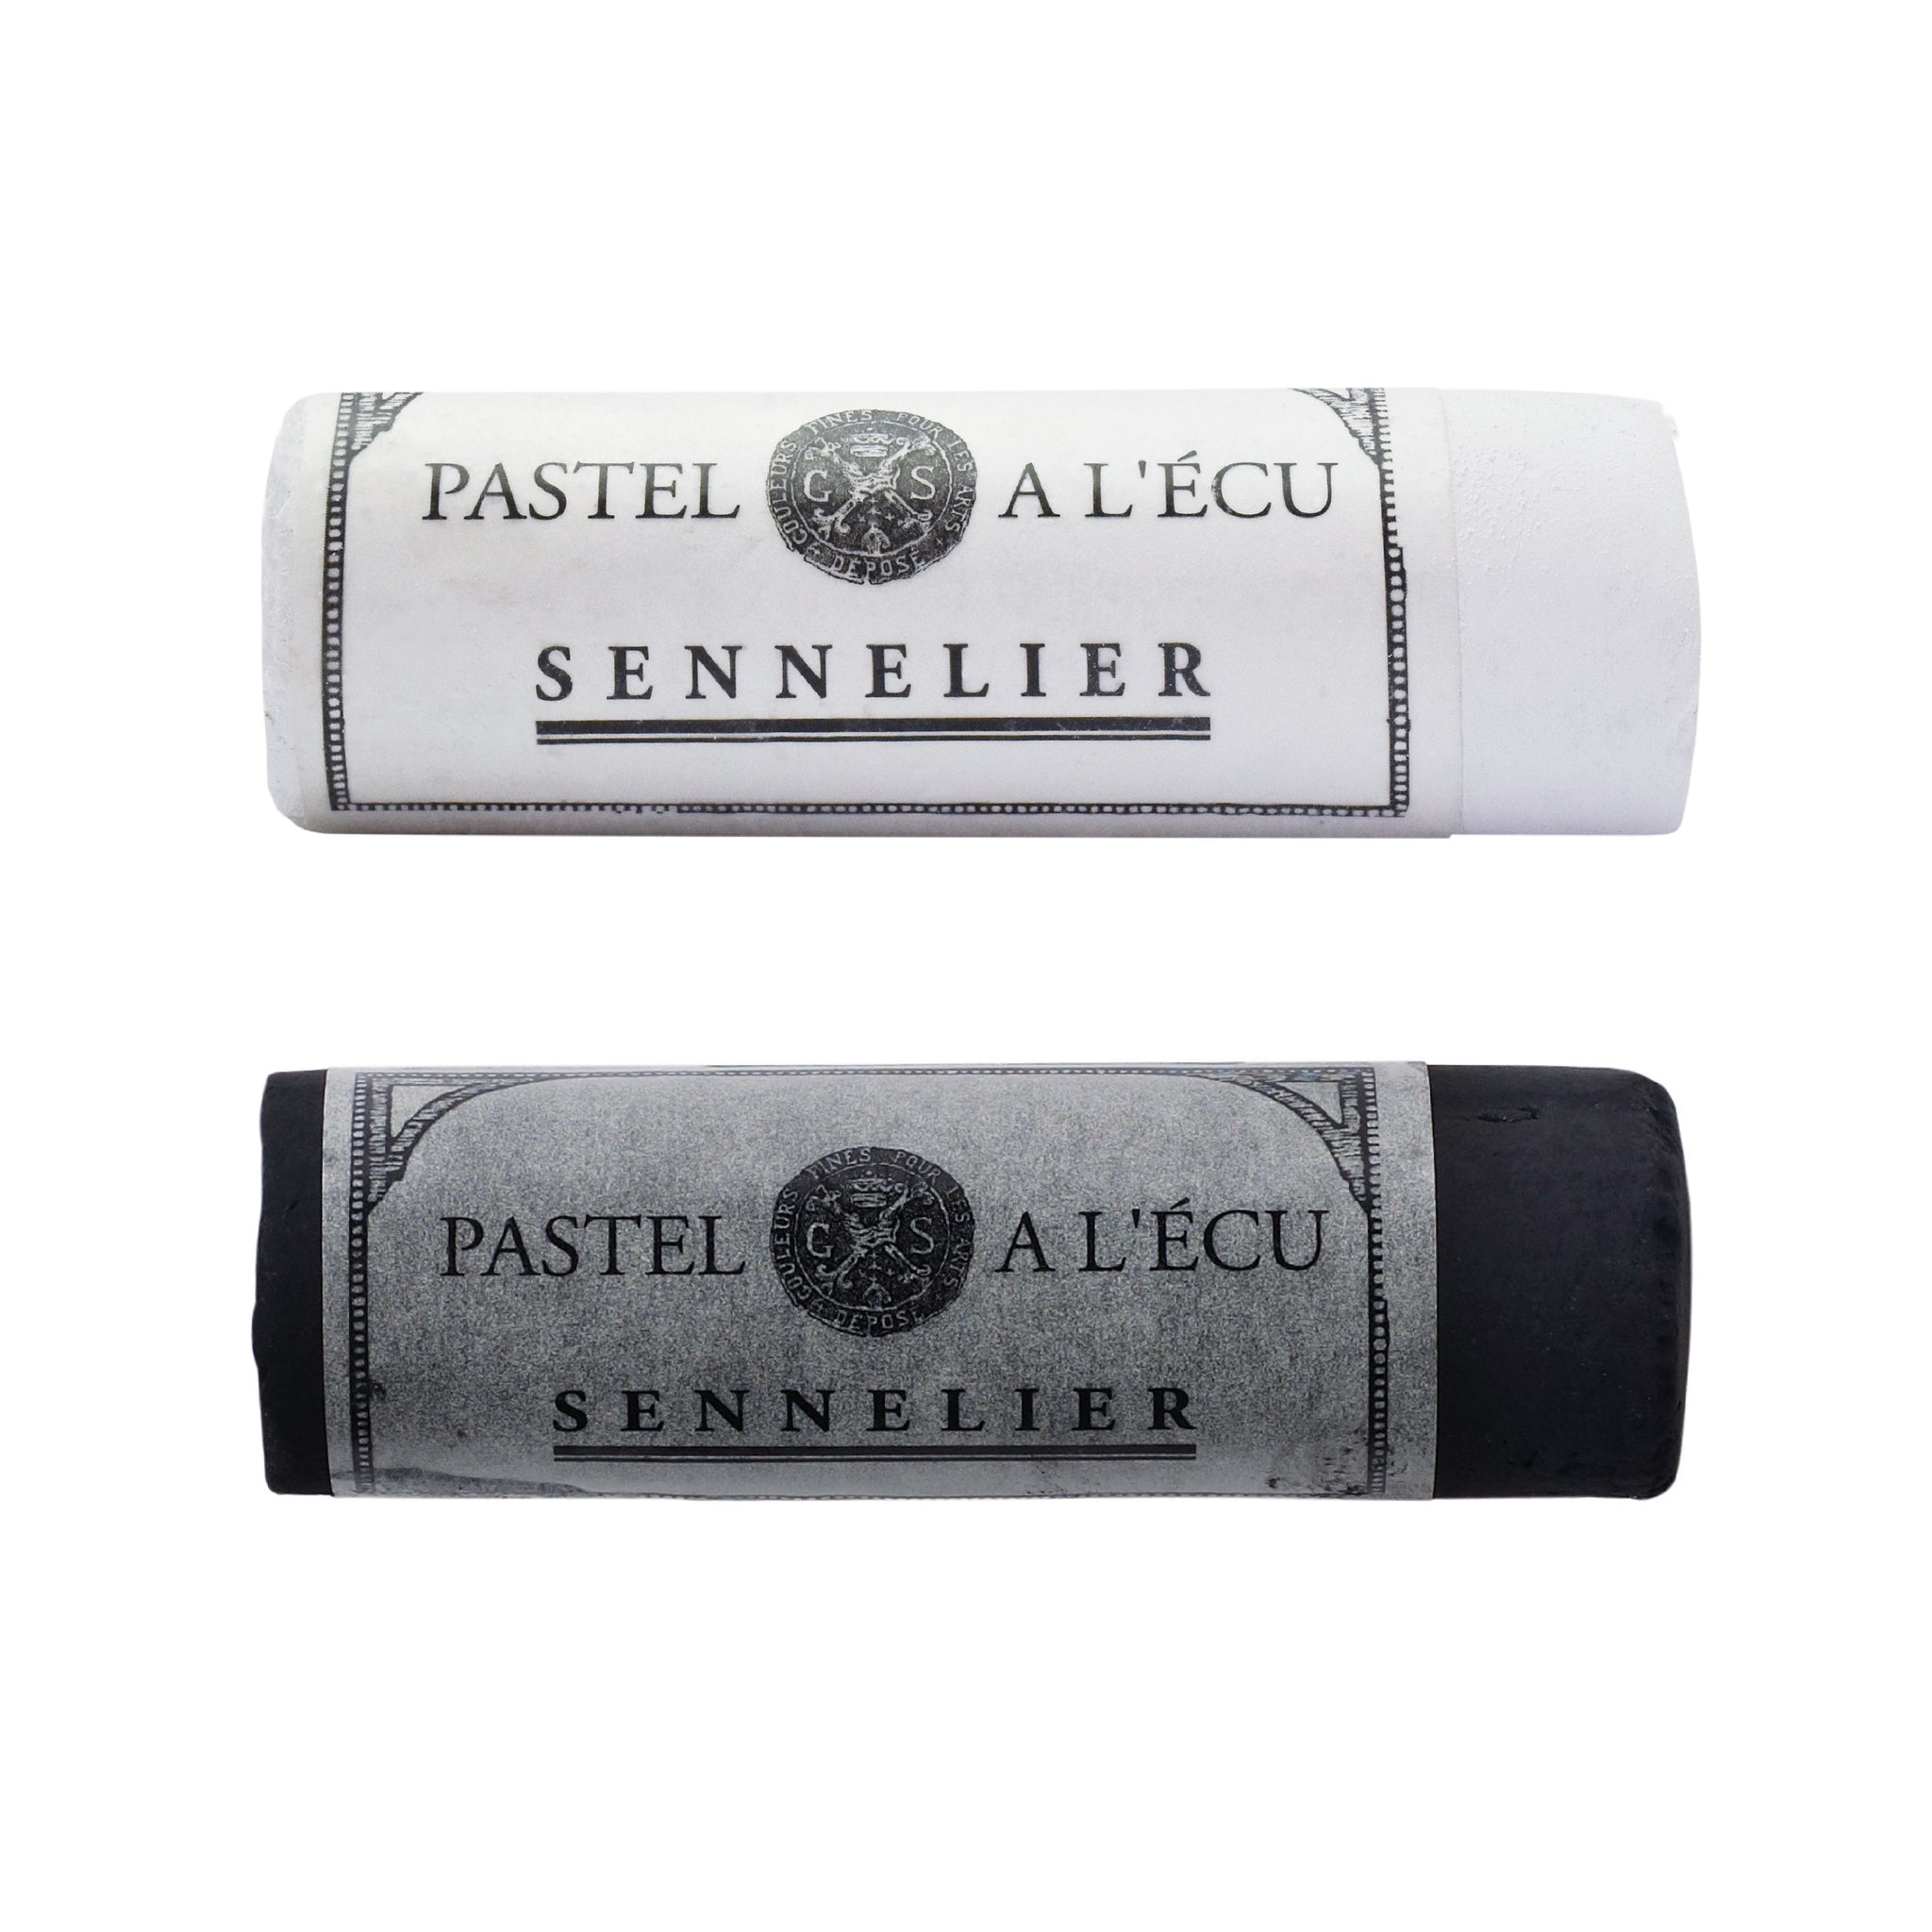 Sennelier Giant Extra Soft Pastels